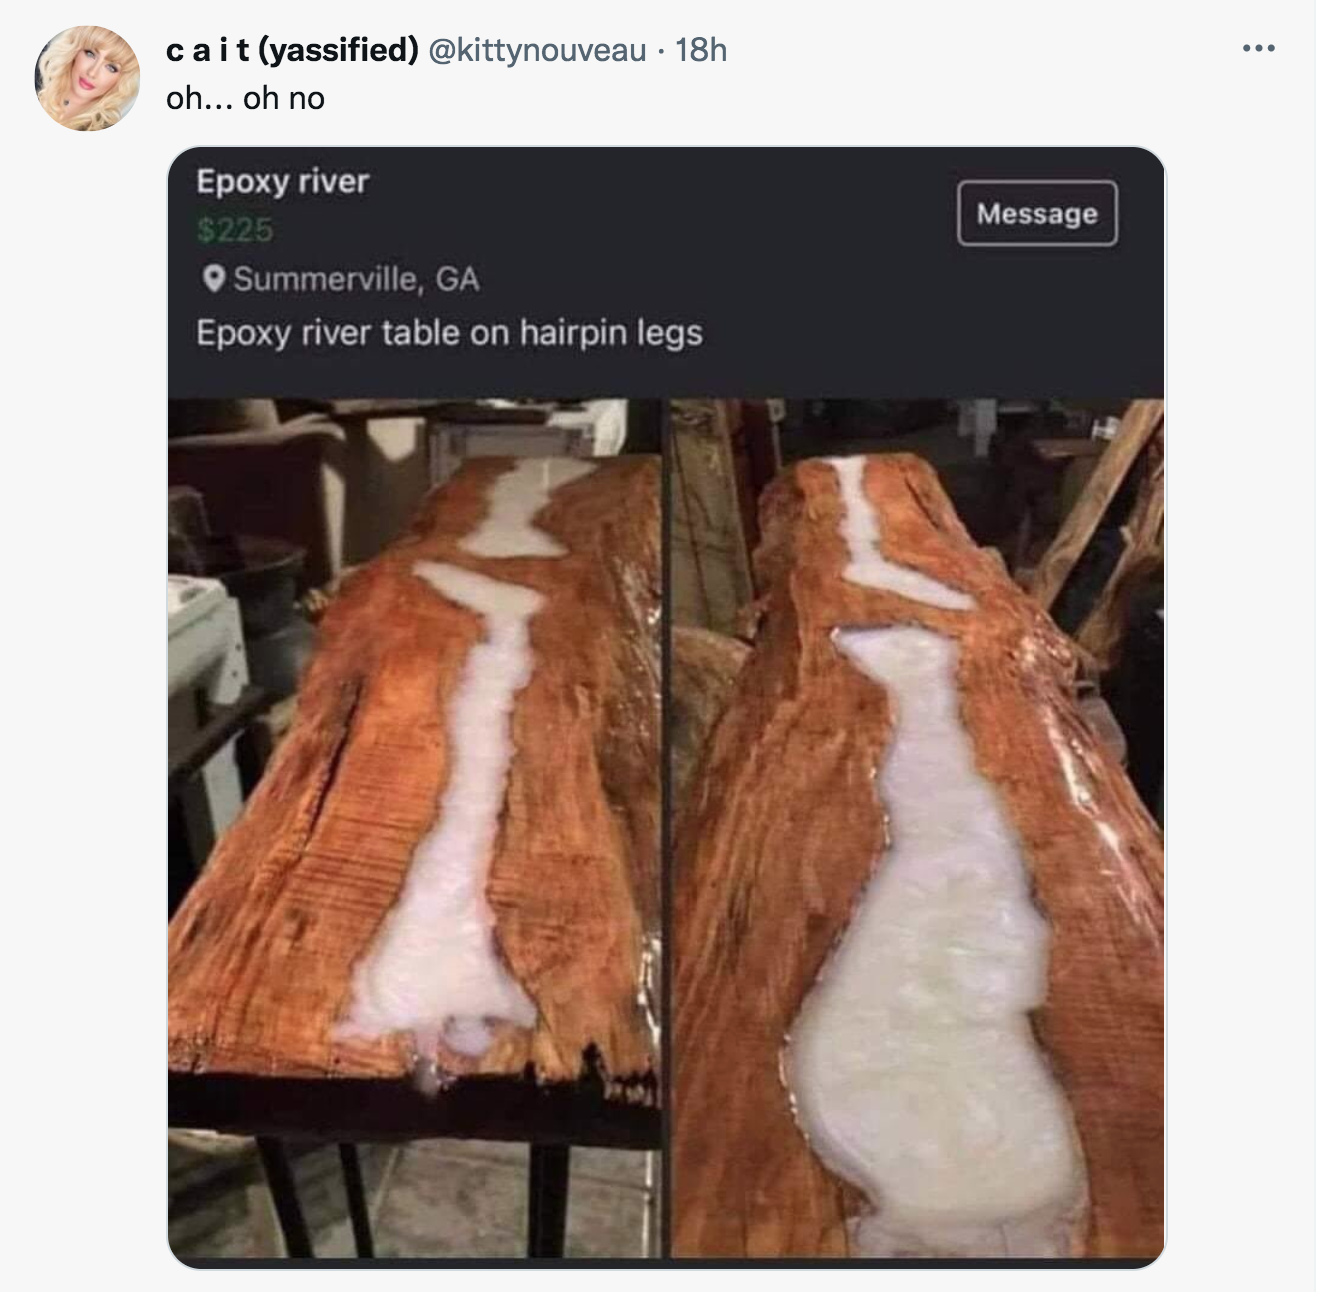 wtf tweets - blursed legs - . . cait yassified 18h oh... oh no Message Epoxy river $225 Summerville, Ga Epoxy river table on hairpin legs